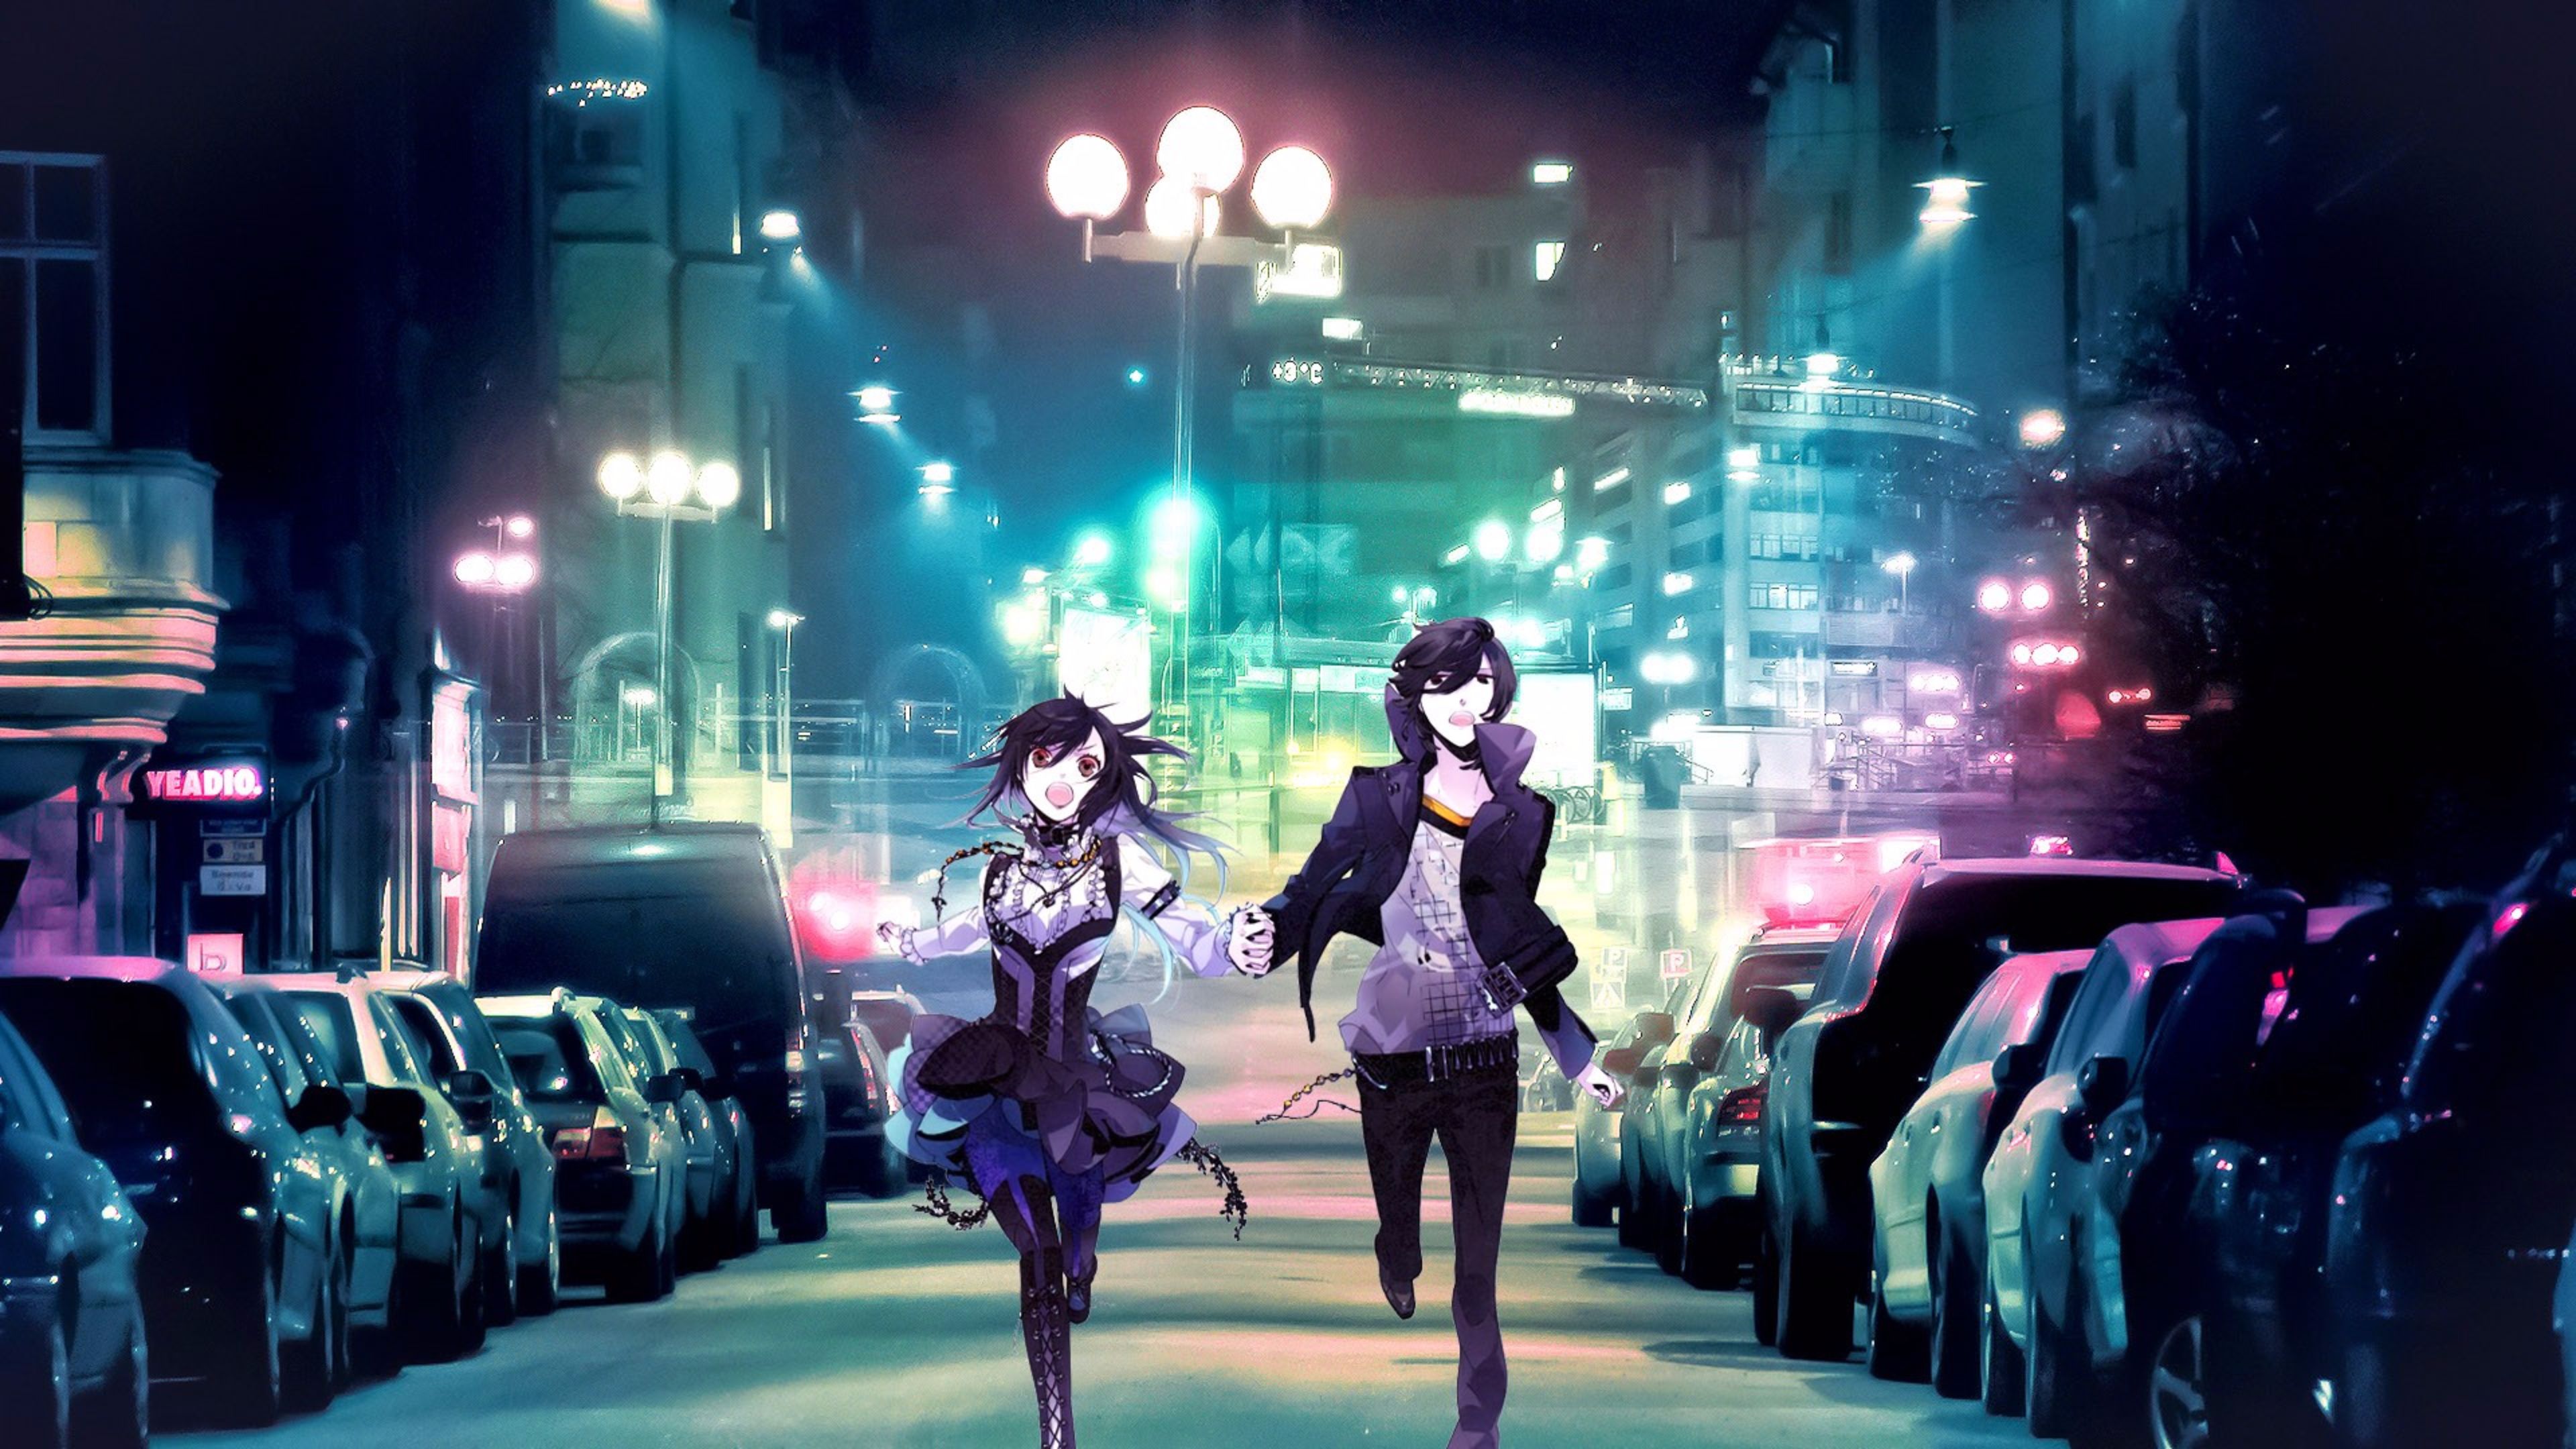 Free download Running the Streets 2016 4K Anime Wallpaper 4K